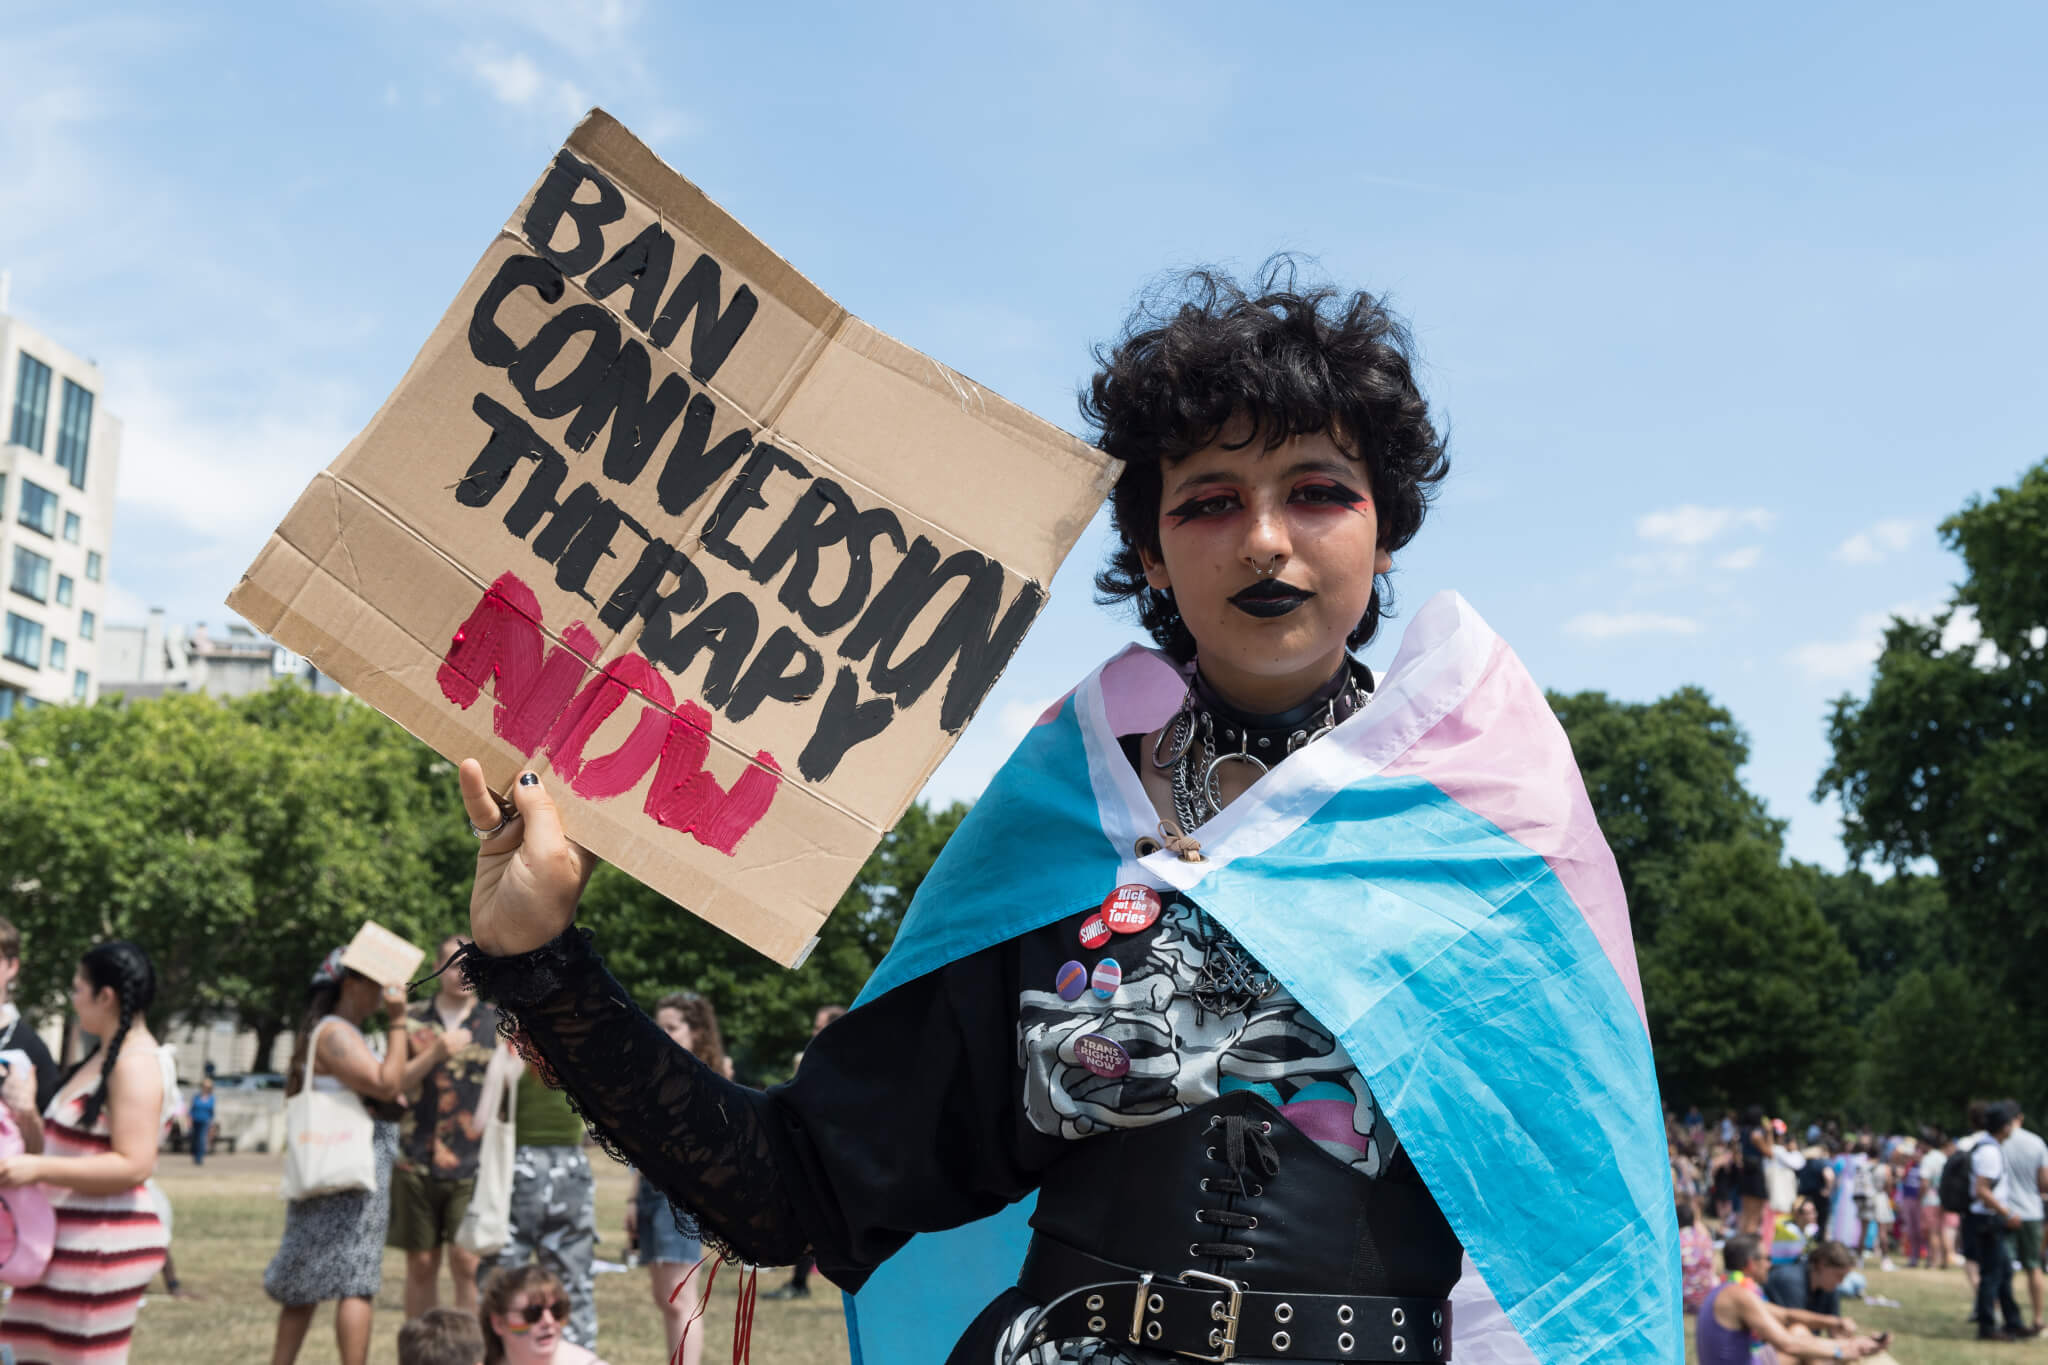 LONDON, UNITED KINGDOM - JULY 09, 2022: Transgender people and their supporters gather at the Wellington Arch before marching through central London during the fourth Trans Pride protest march for equality on July 09, 2022 in London, England. Protesters demonstrate against the exclusion of trangender people from conversion therapy ban, call for abolition of the equalities watchdog Equalities and Human Rights Commission (EHRC) after a series of damaging interventions on trans rights, and show solidarity with Texan parents of trans children after the governor Greg Abbott compared gender-affirming healthcare to child abuse. (Photo by WIktor Szymanowicz/NurPhoto)